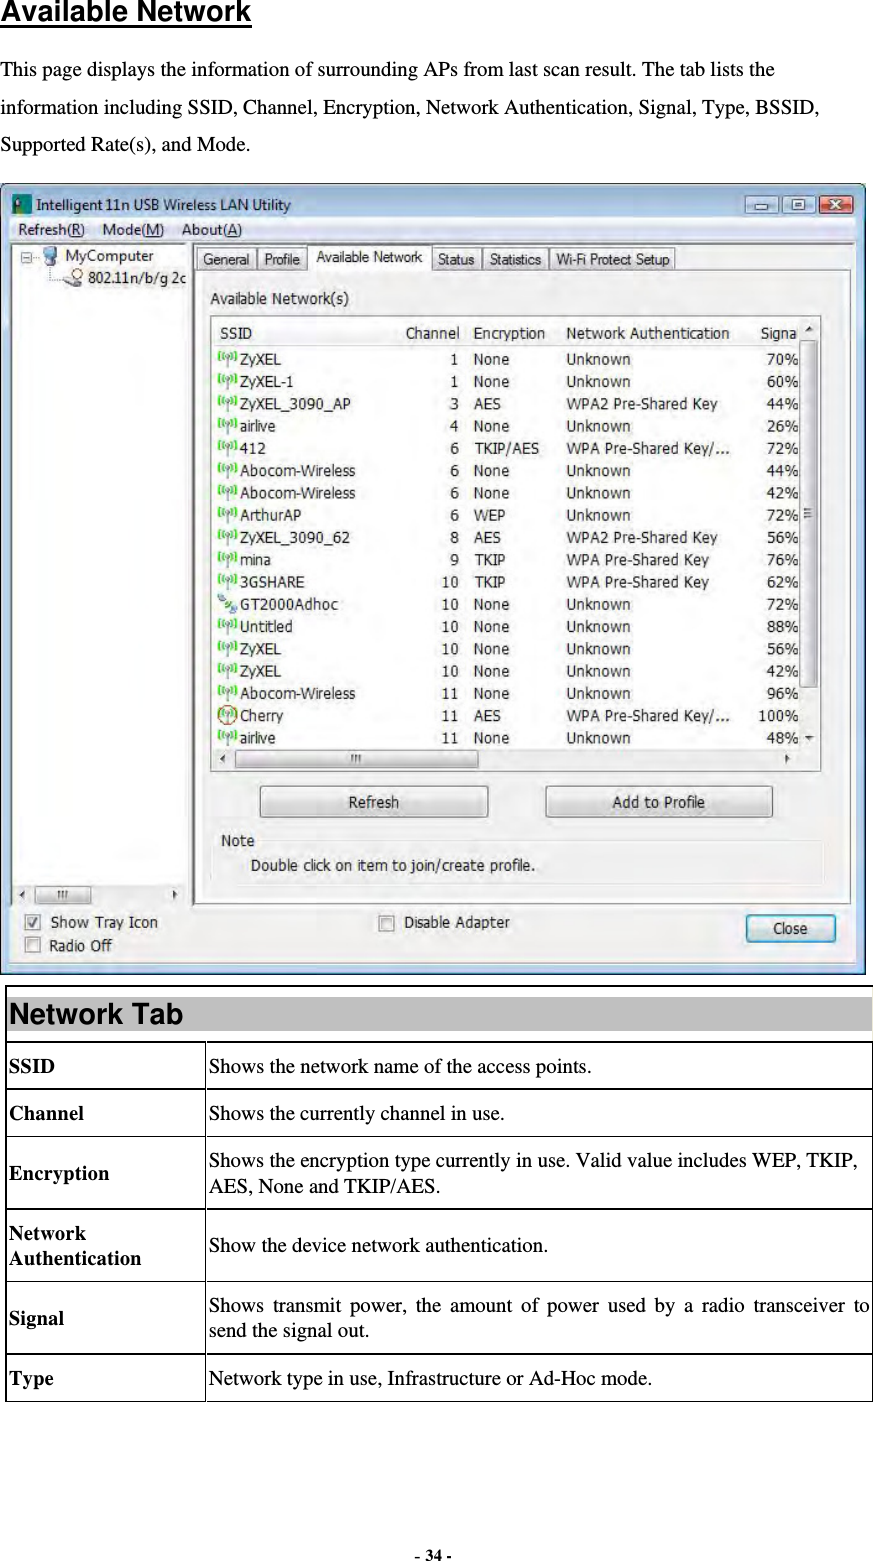  - 34 - Available Network This page displays the information of surrounding APs from last scan result. The tab lists the information including SSID, Channel, Encryption, Network Authentication, Signal, Type, BSSID, Supported Rate(s), and Mode.  Network Tab SSID  Shows the network name of the access points. Channel  Shows the currently channel in use. Encryption  Shows the encryption type currently in use. Valid value includes WEP, TKIP, AES, None and TKIP/AES. Network Authentication  Show the device network authentication. Signal  Shows transmit power, the amount of power used by a radio transceiver to send the signal out. Type Network type in use, Infrastructure or Ad-Hoc mode. 